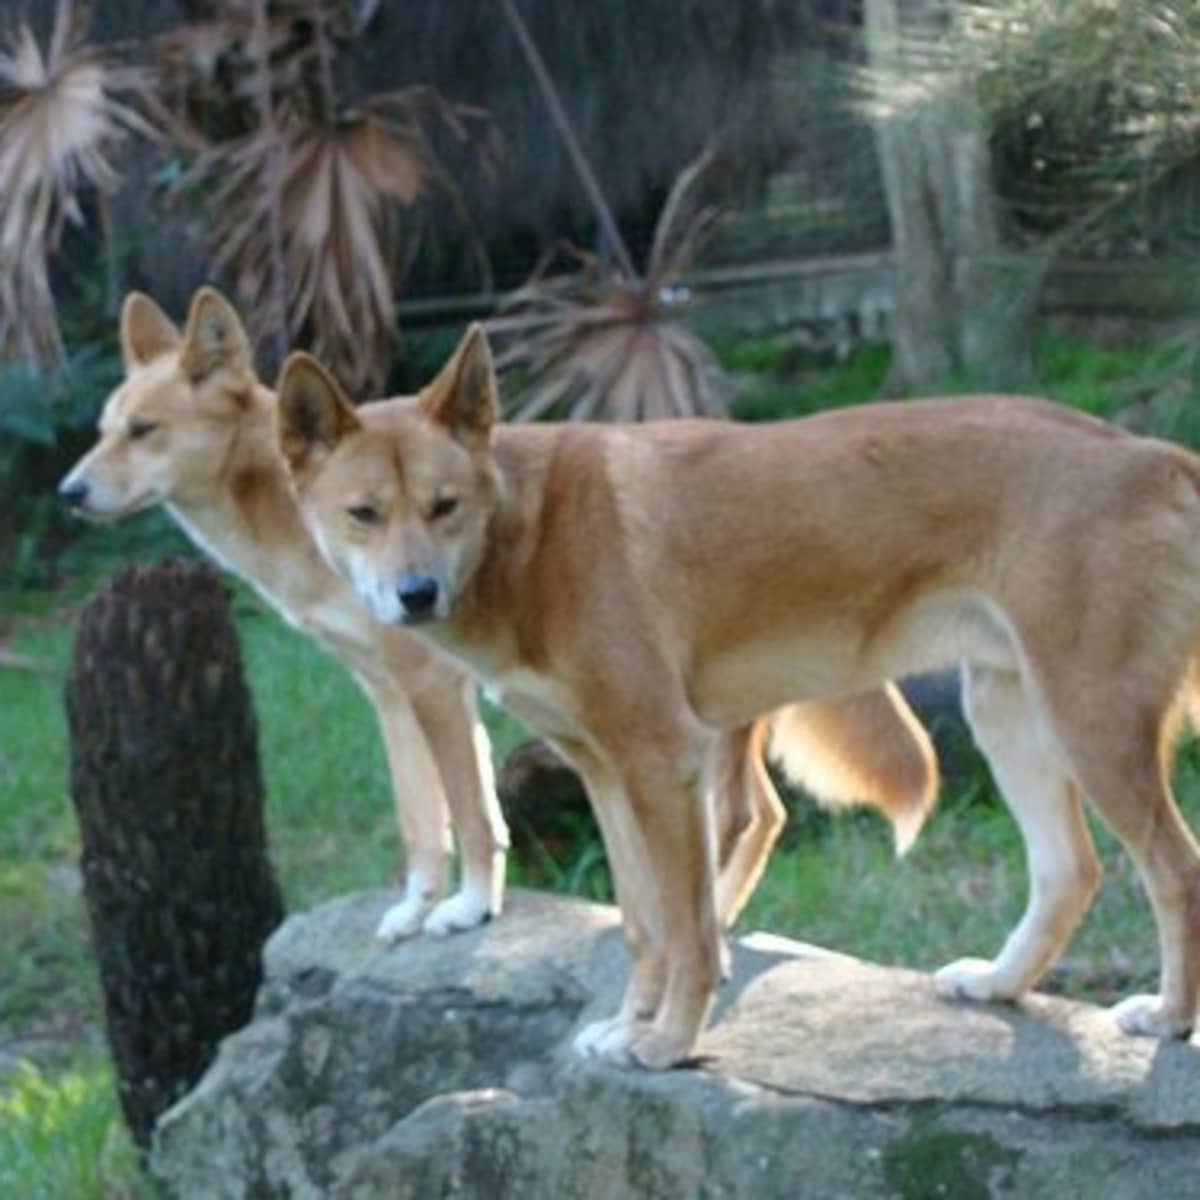 can dogs be part dingo